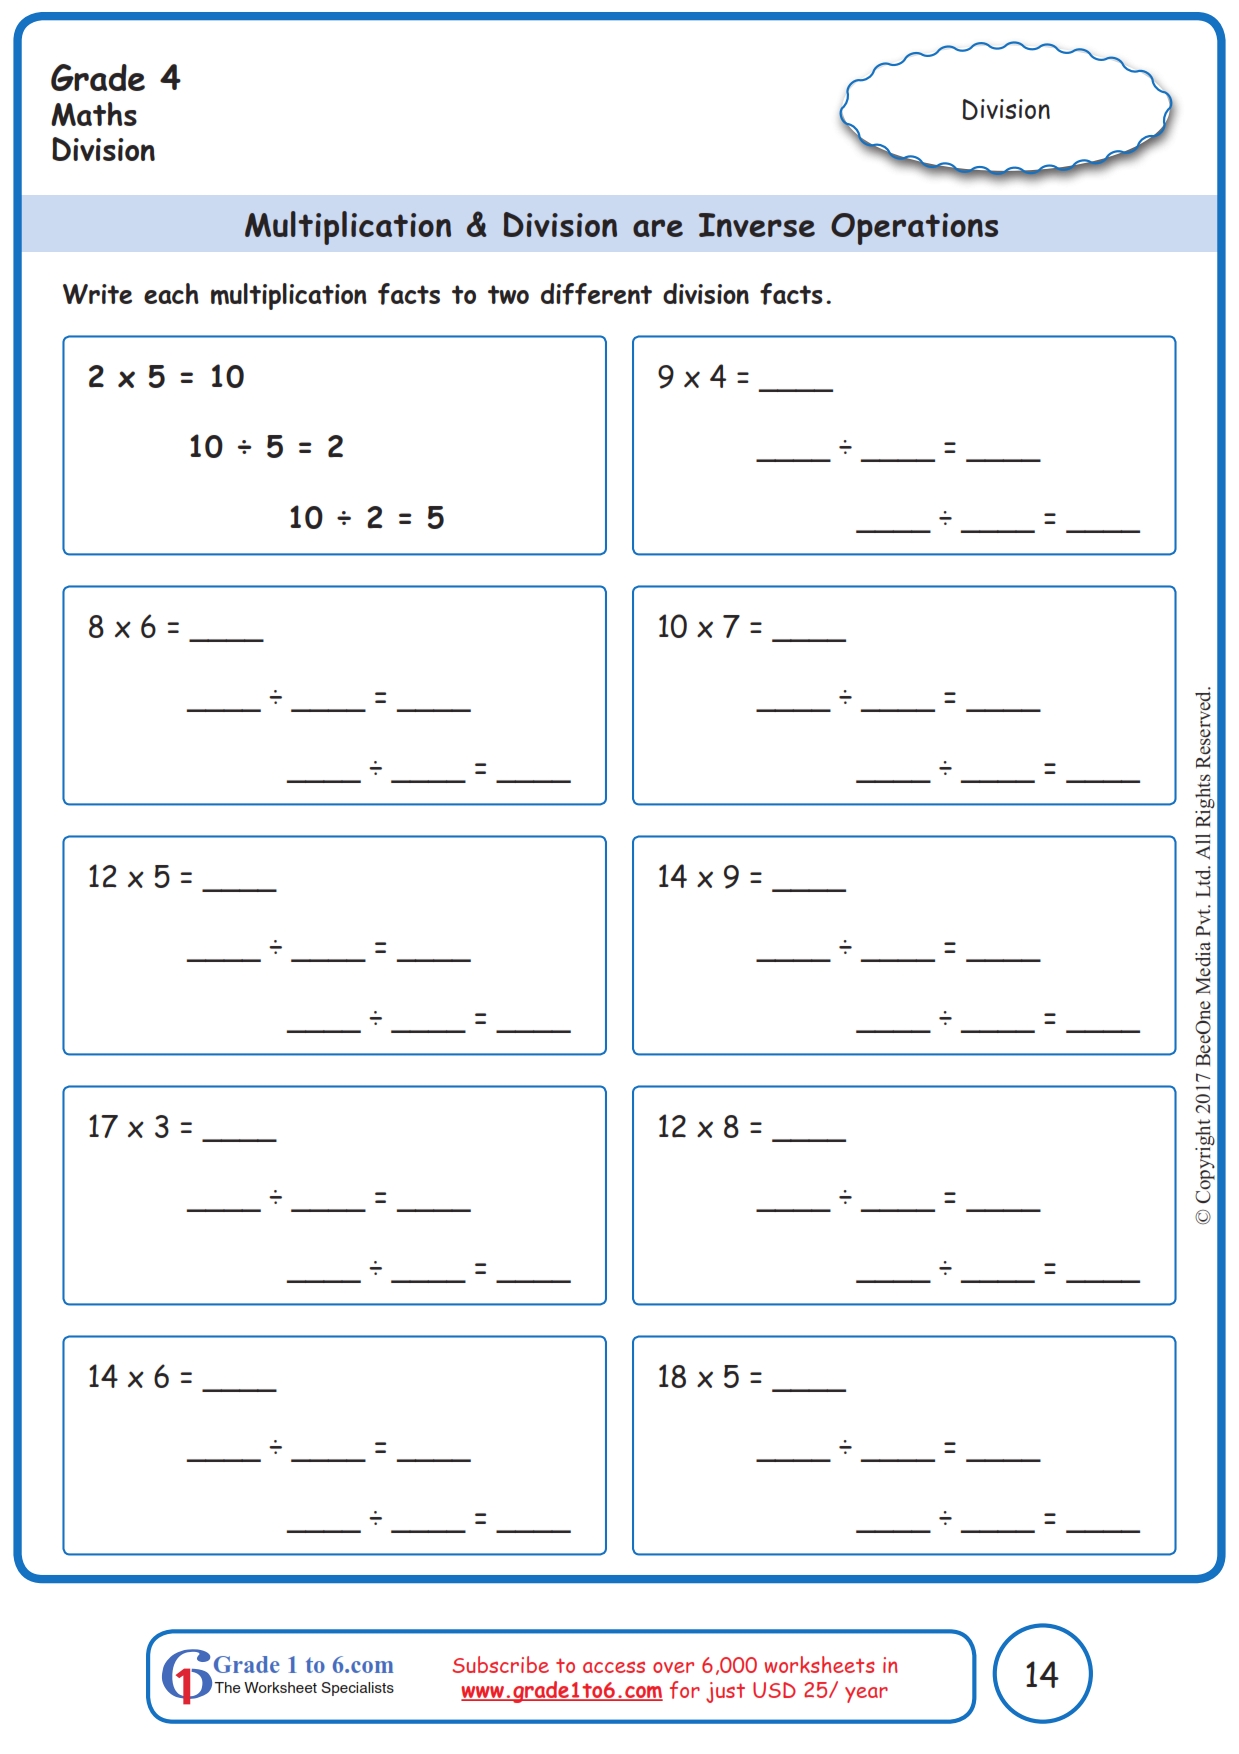 inverse-operations-worksheets-multiplication-and-division